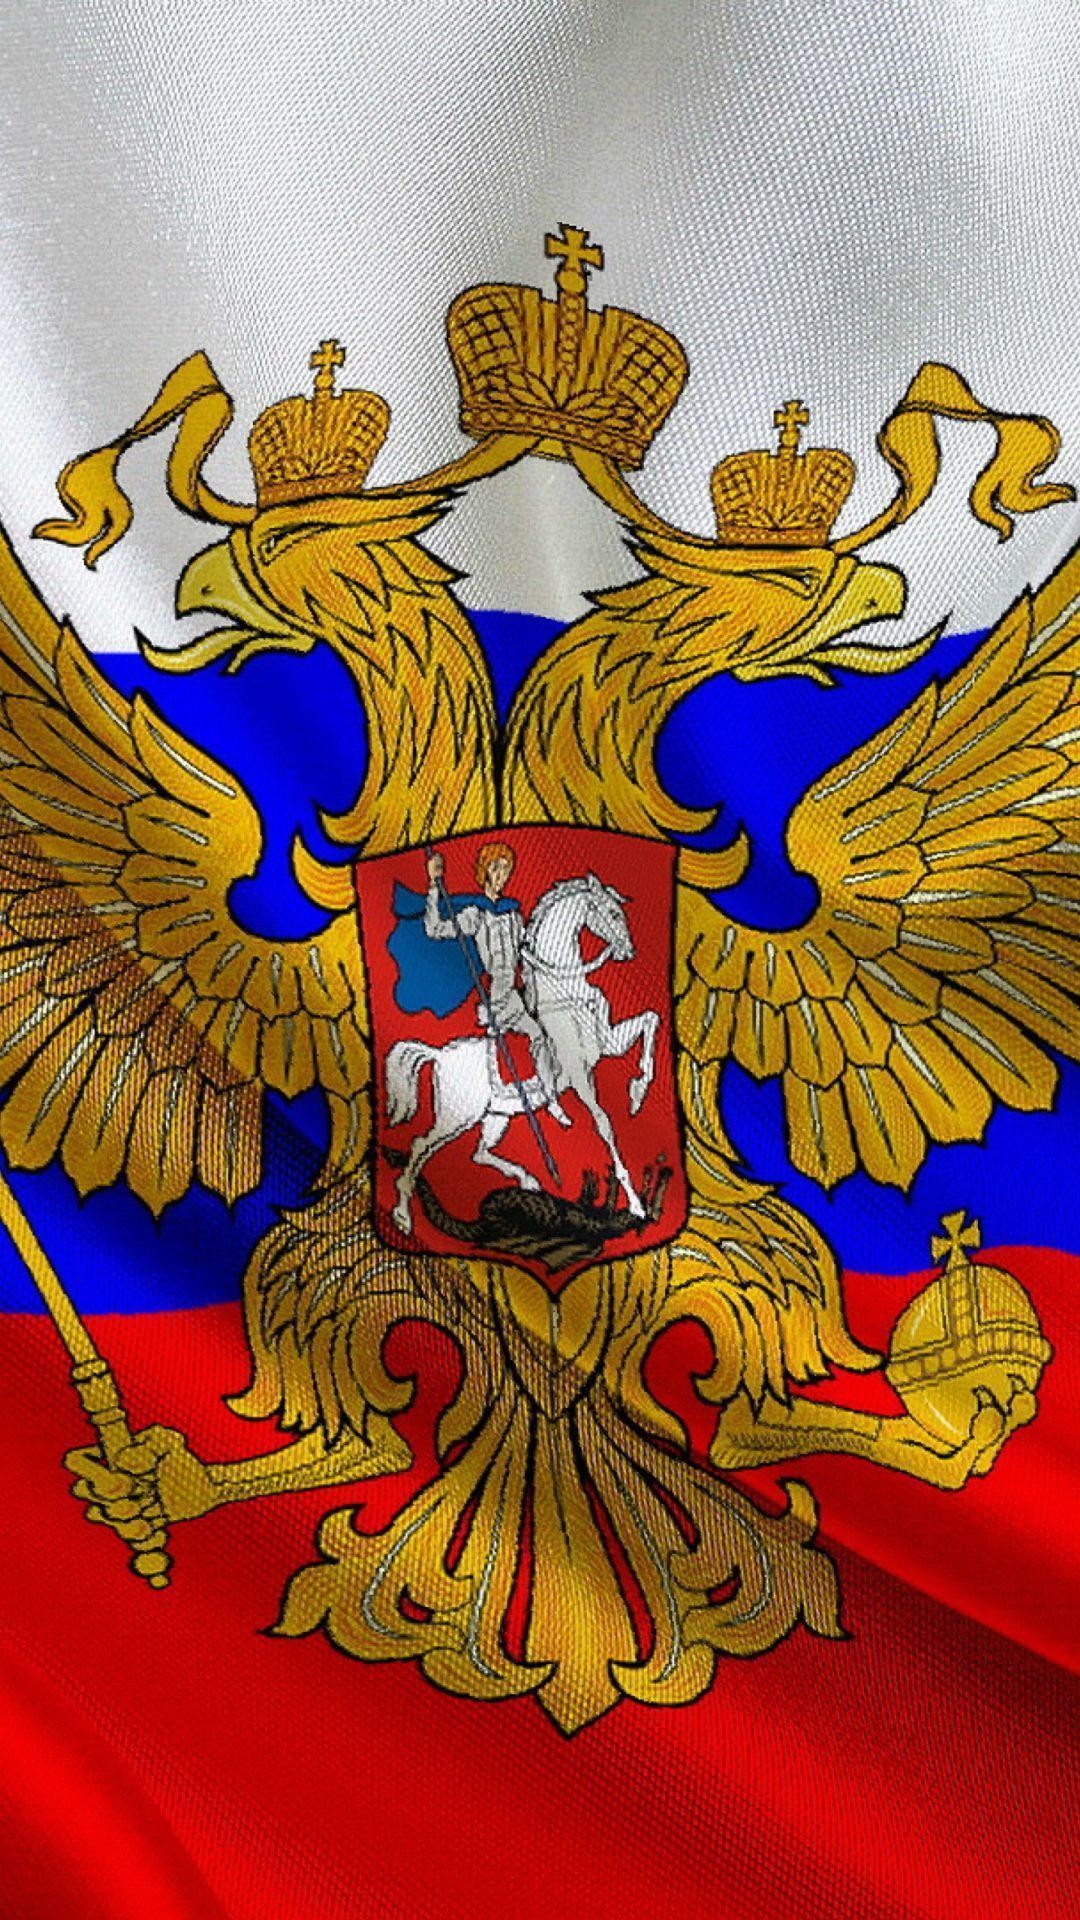 1080x1920 Russian Federation Flag Wallpaper for iPhone 6 Plus